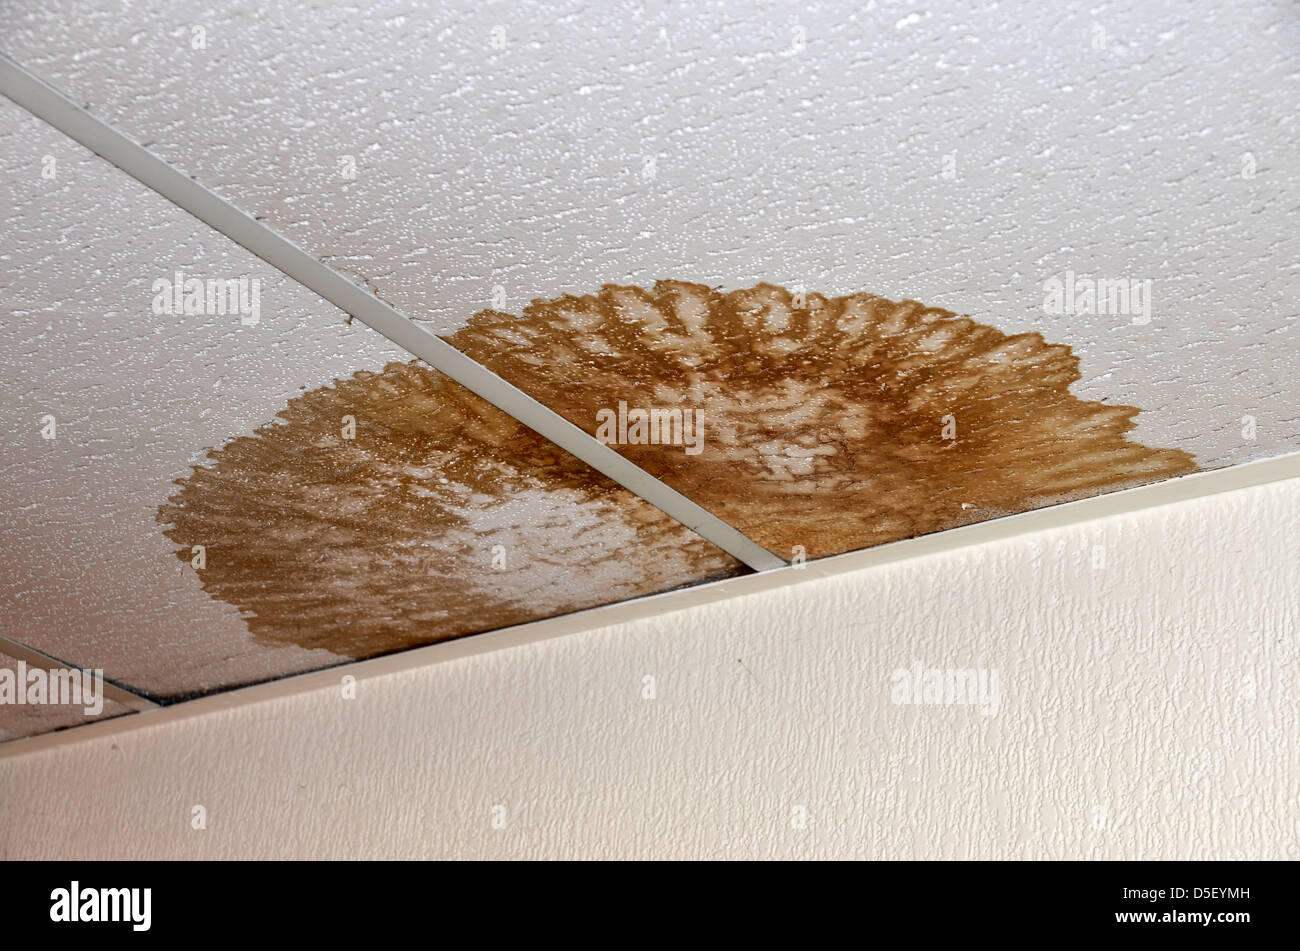 Water Stained Ceiling Tiles Number 3290 Stock Photo 55033457 Alamy